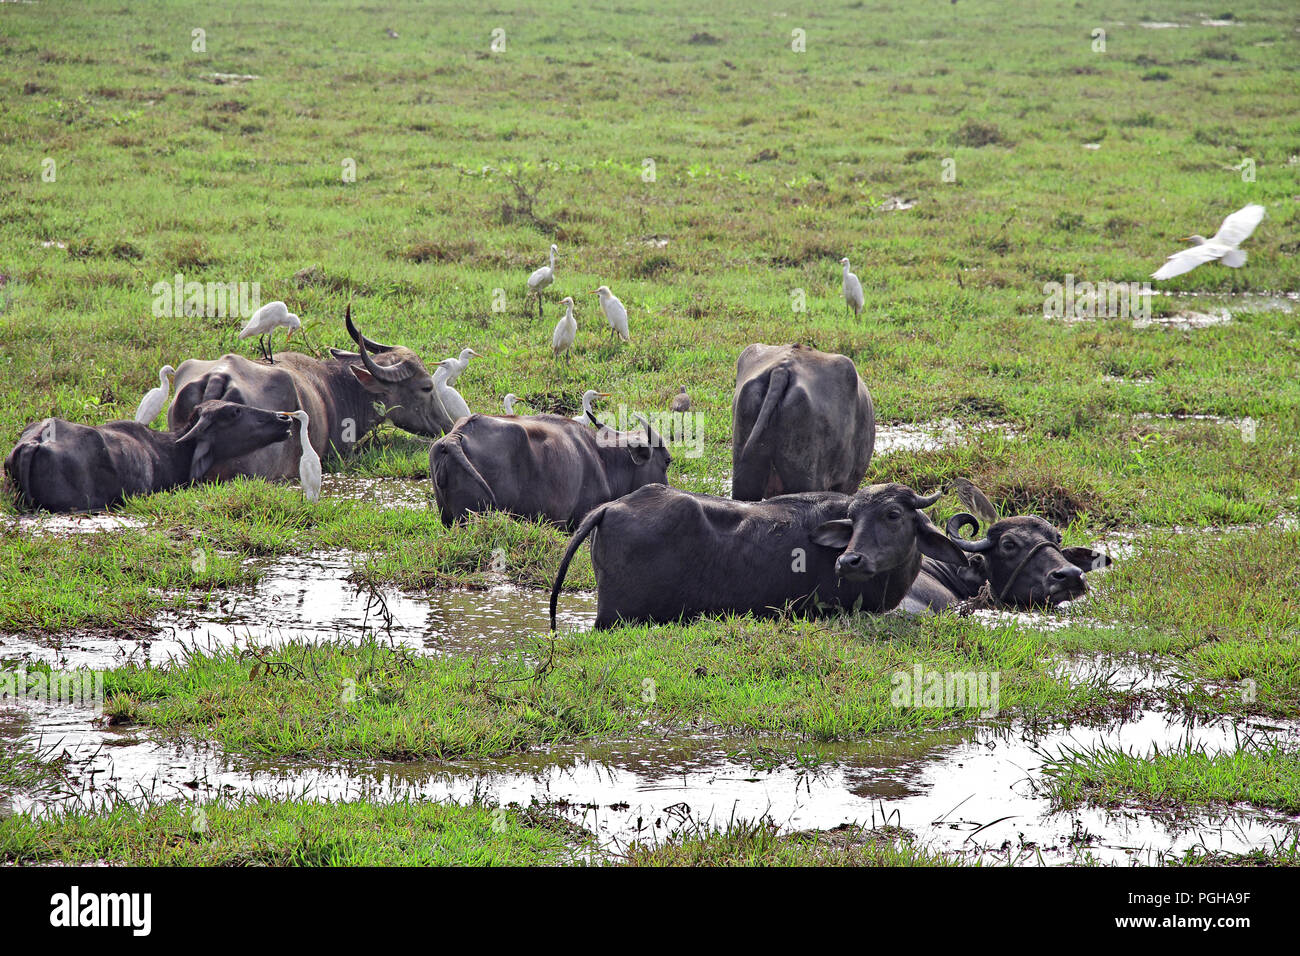 Herd of Indian water buffaloes grazing in marshy grass field, along with flock of white egret birds Stock Photo